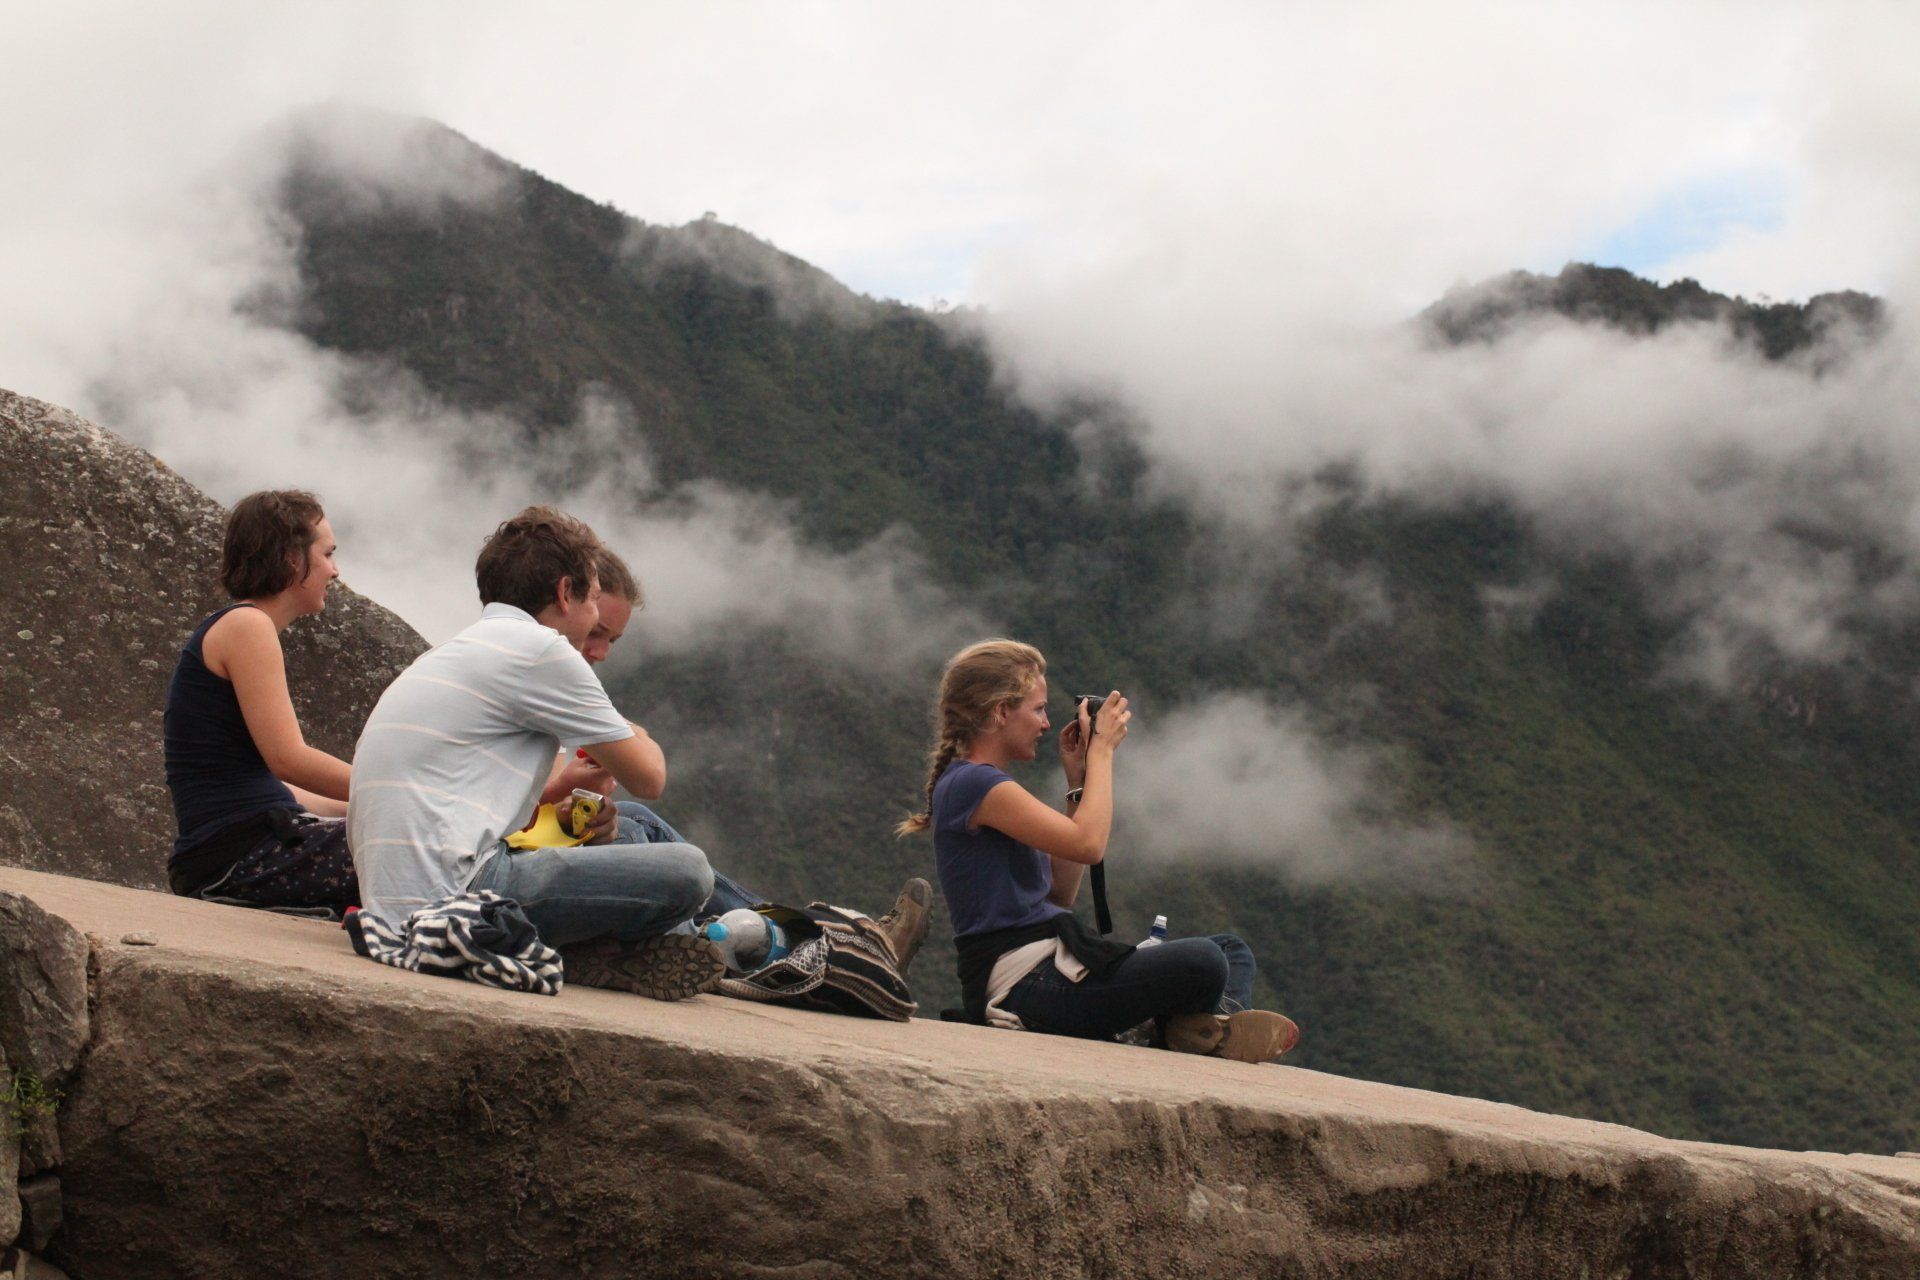 Meditation Moment in the surroundings of Machu Picchu